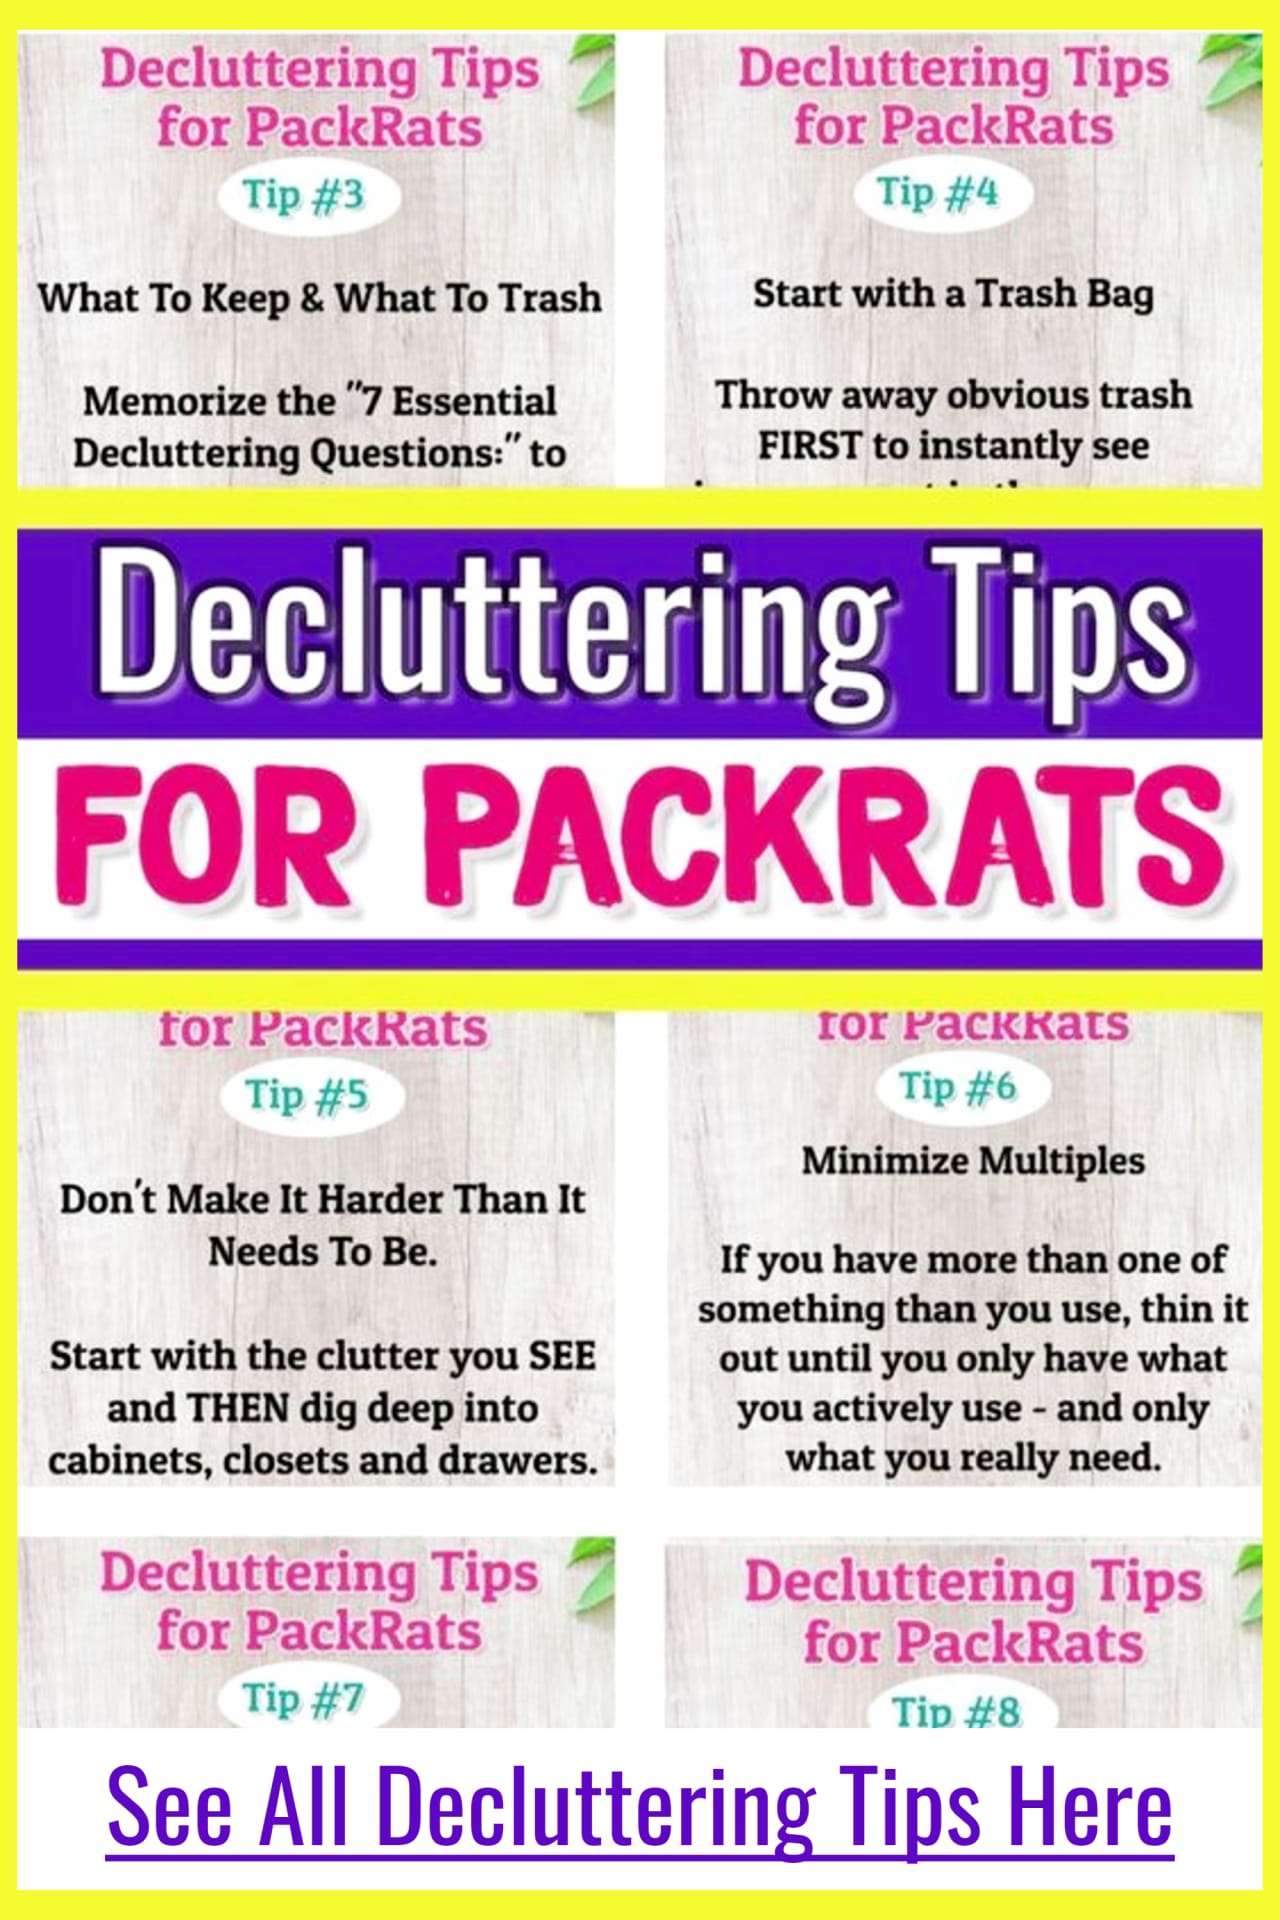 Decluttering tips and Organizing Ideas For The Home - Decluttering Ideas if you're feeling overwhelmed - where to start decluttering and organizing your messy house - decluttering step by step to declutter and organize without feeling overwhelmed